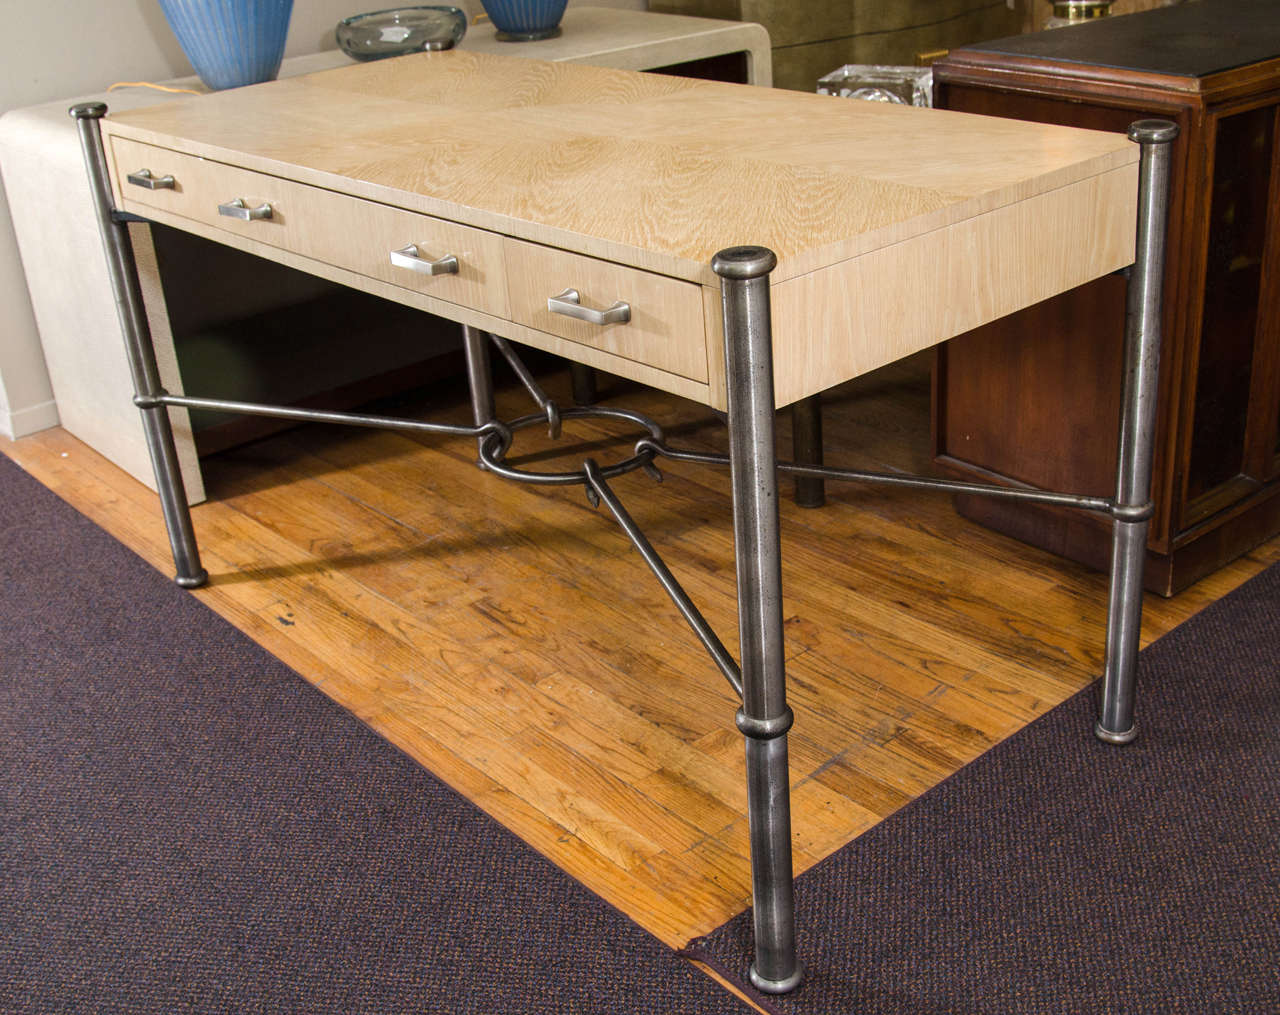 A vintage desk or console table in solid oak with oak veneer design on top, steel frame, and chrome hardware by Jay Spectre for Century. The piece retains its original label. Good vintage condition with age appropriate wear and patina.